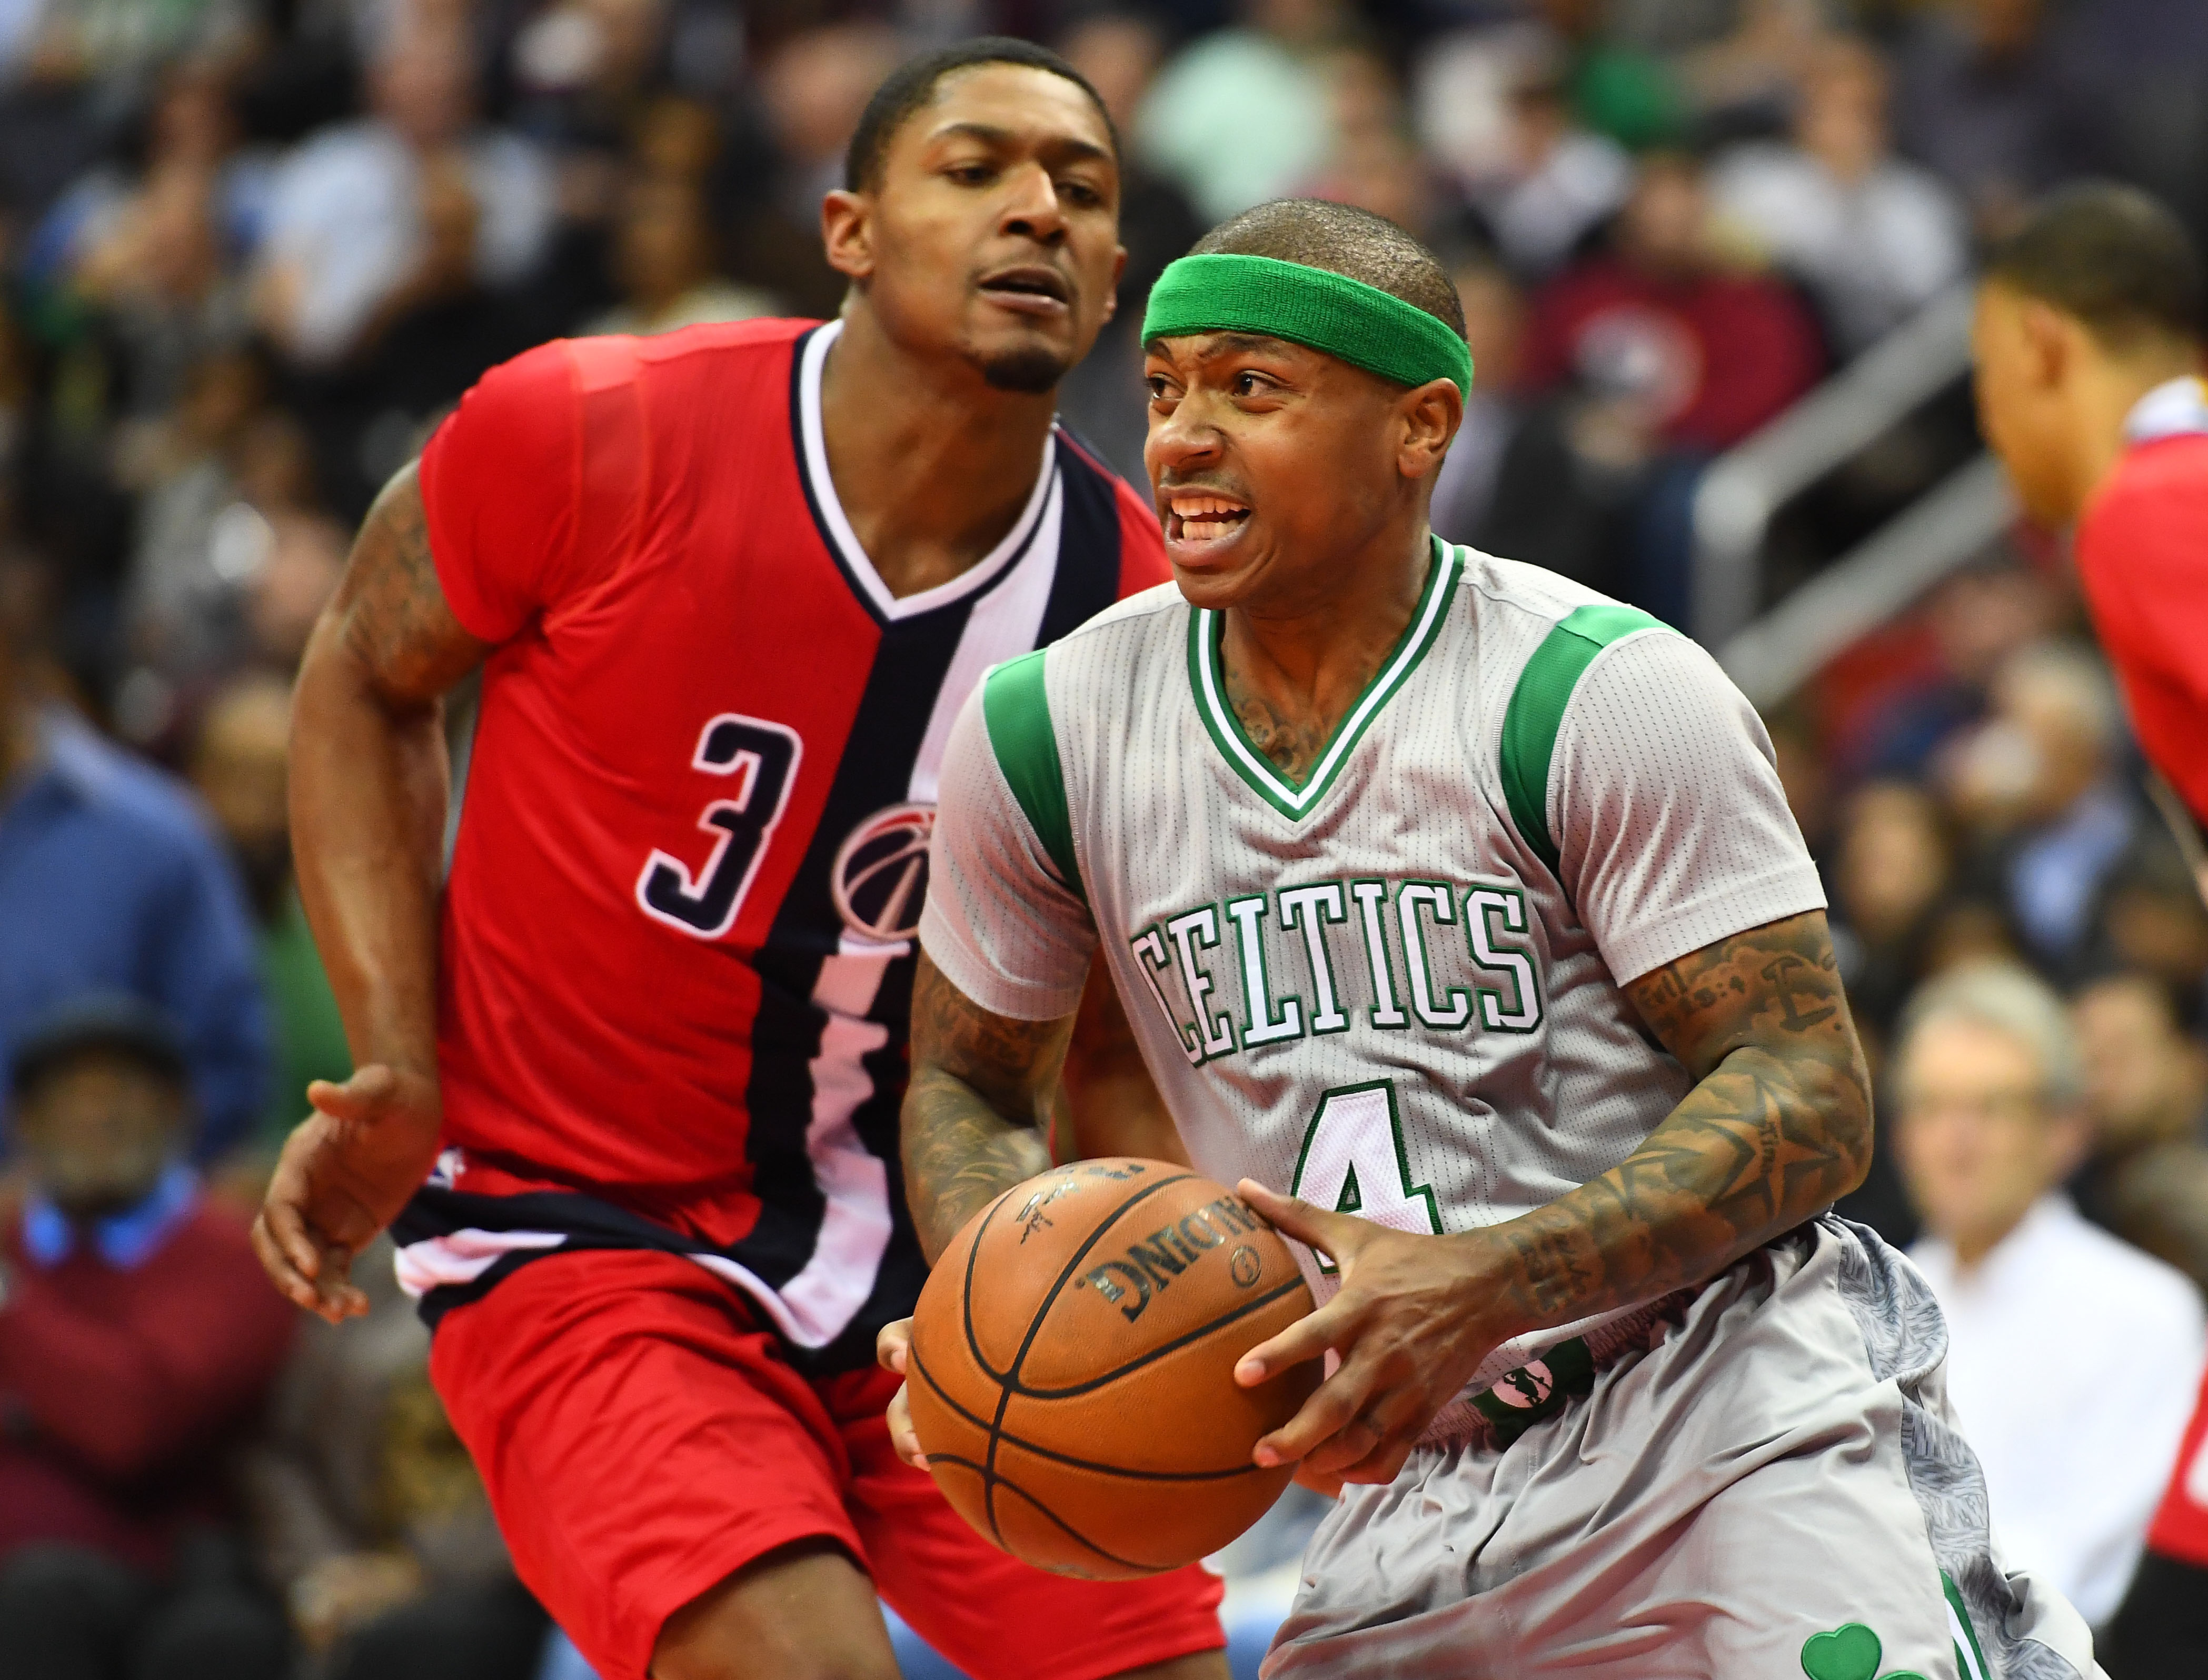 Wizards at Celtics live stream: How to watch online